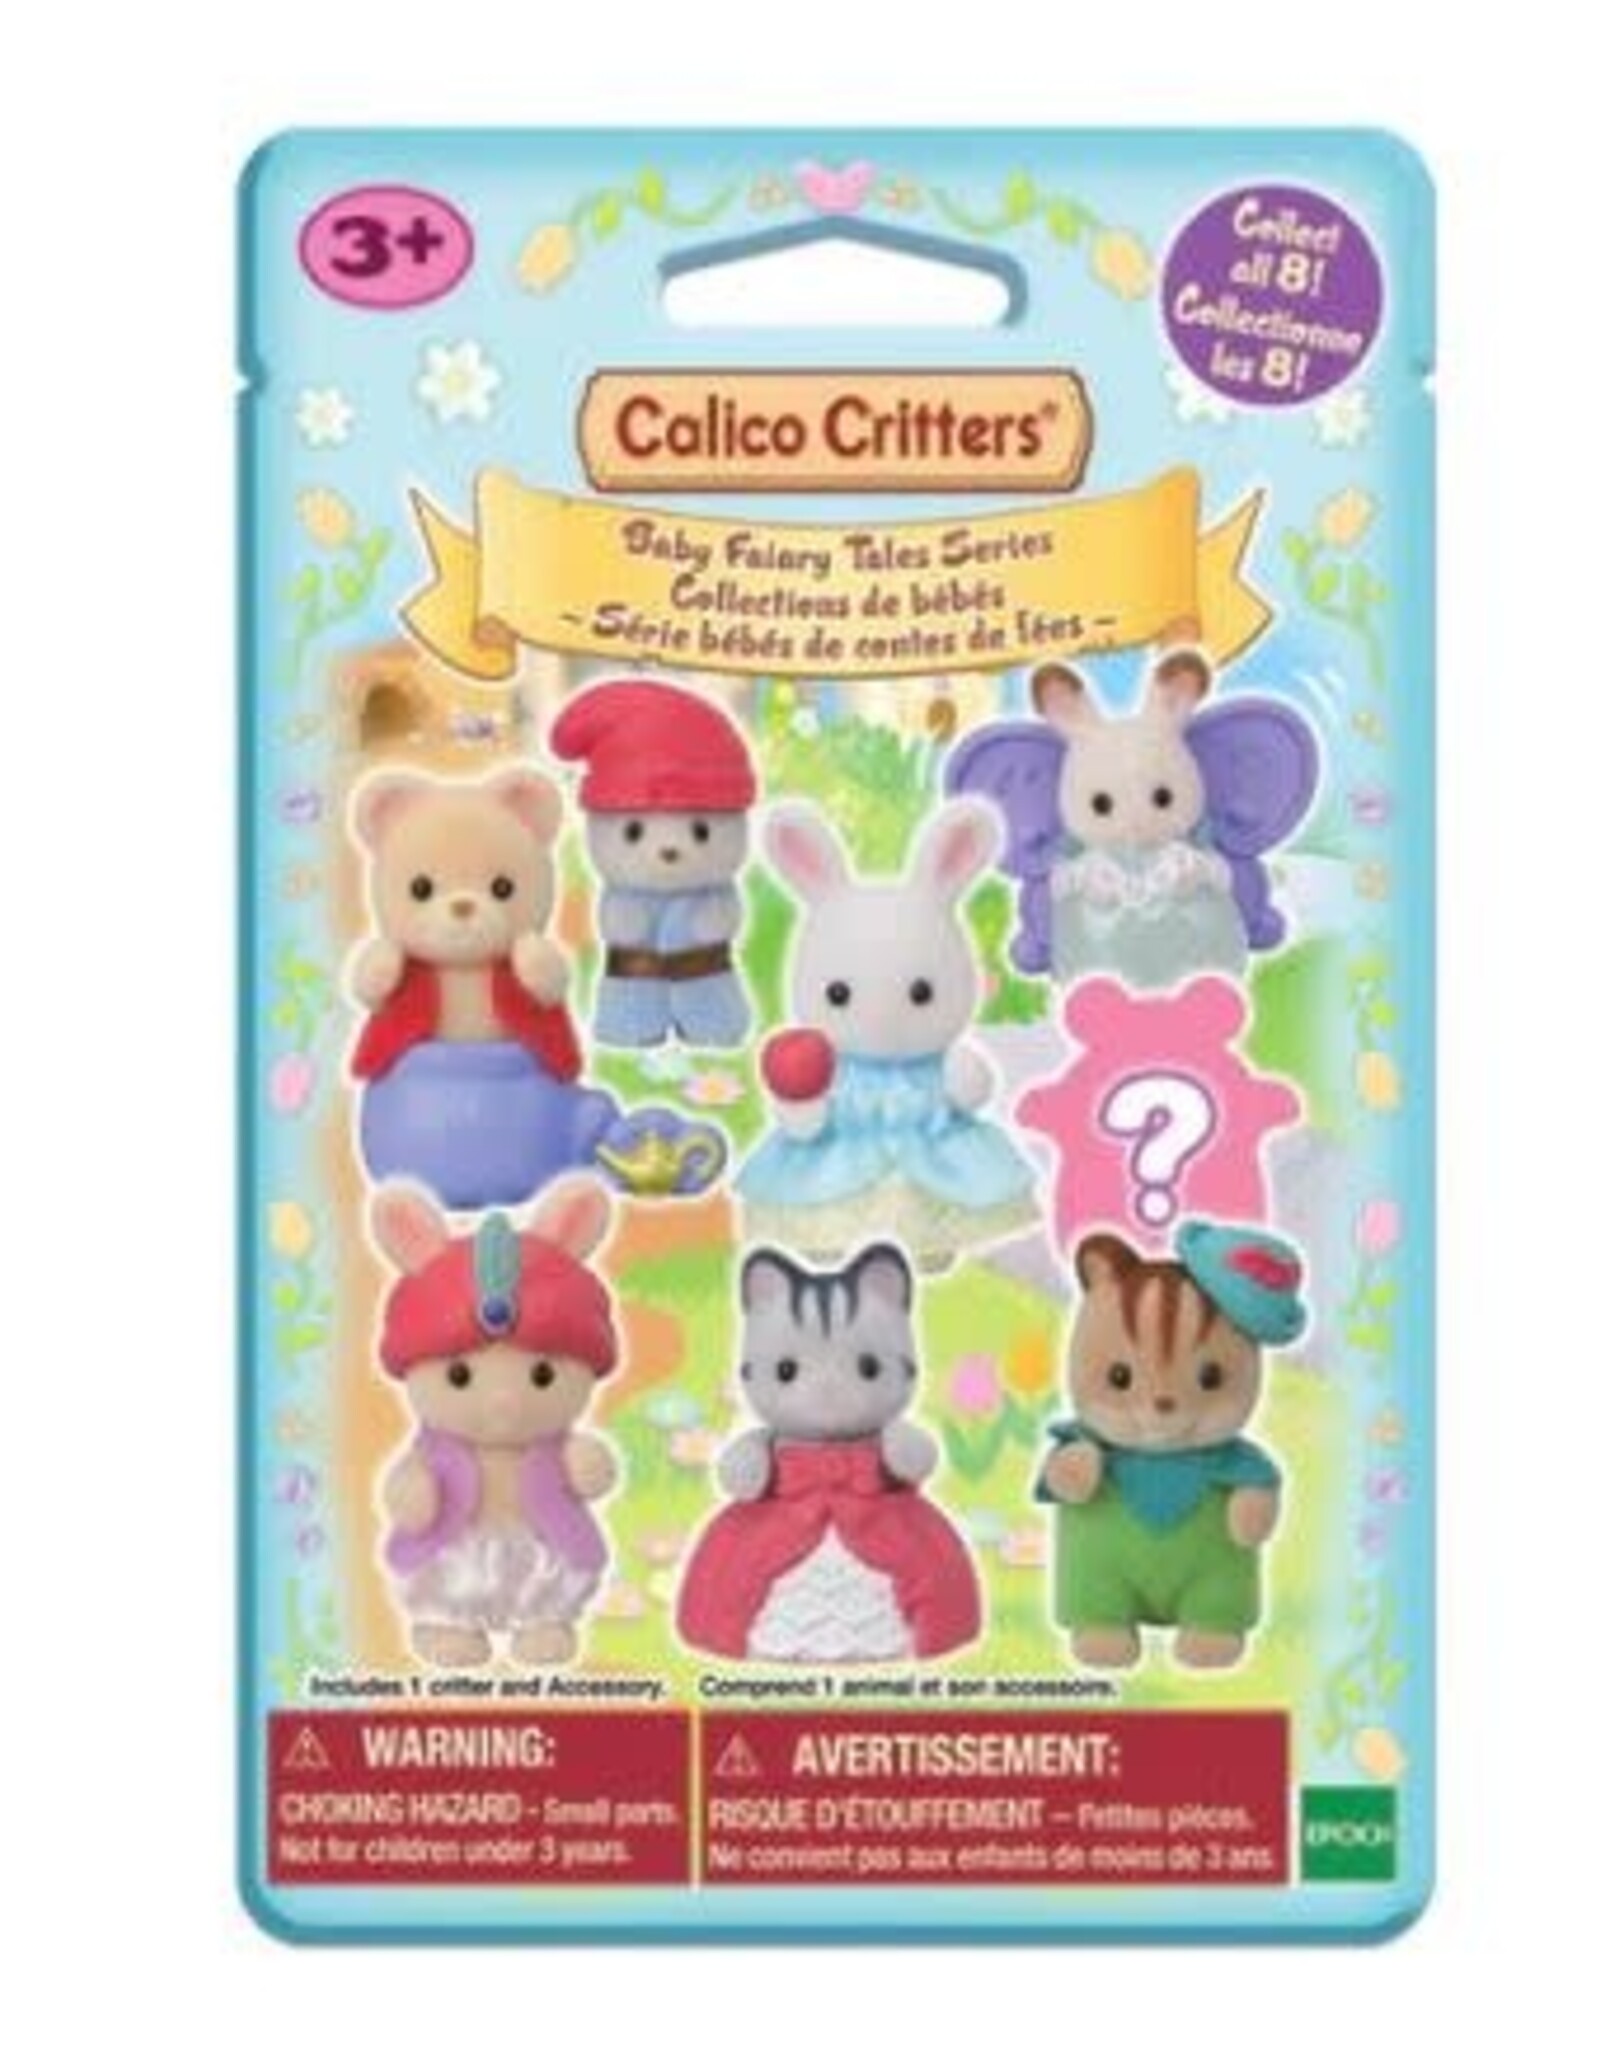 Calico Critters Baby Collectibles - Baby Fairy Tale Series